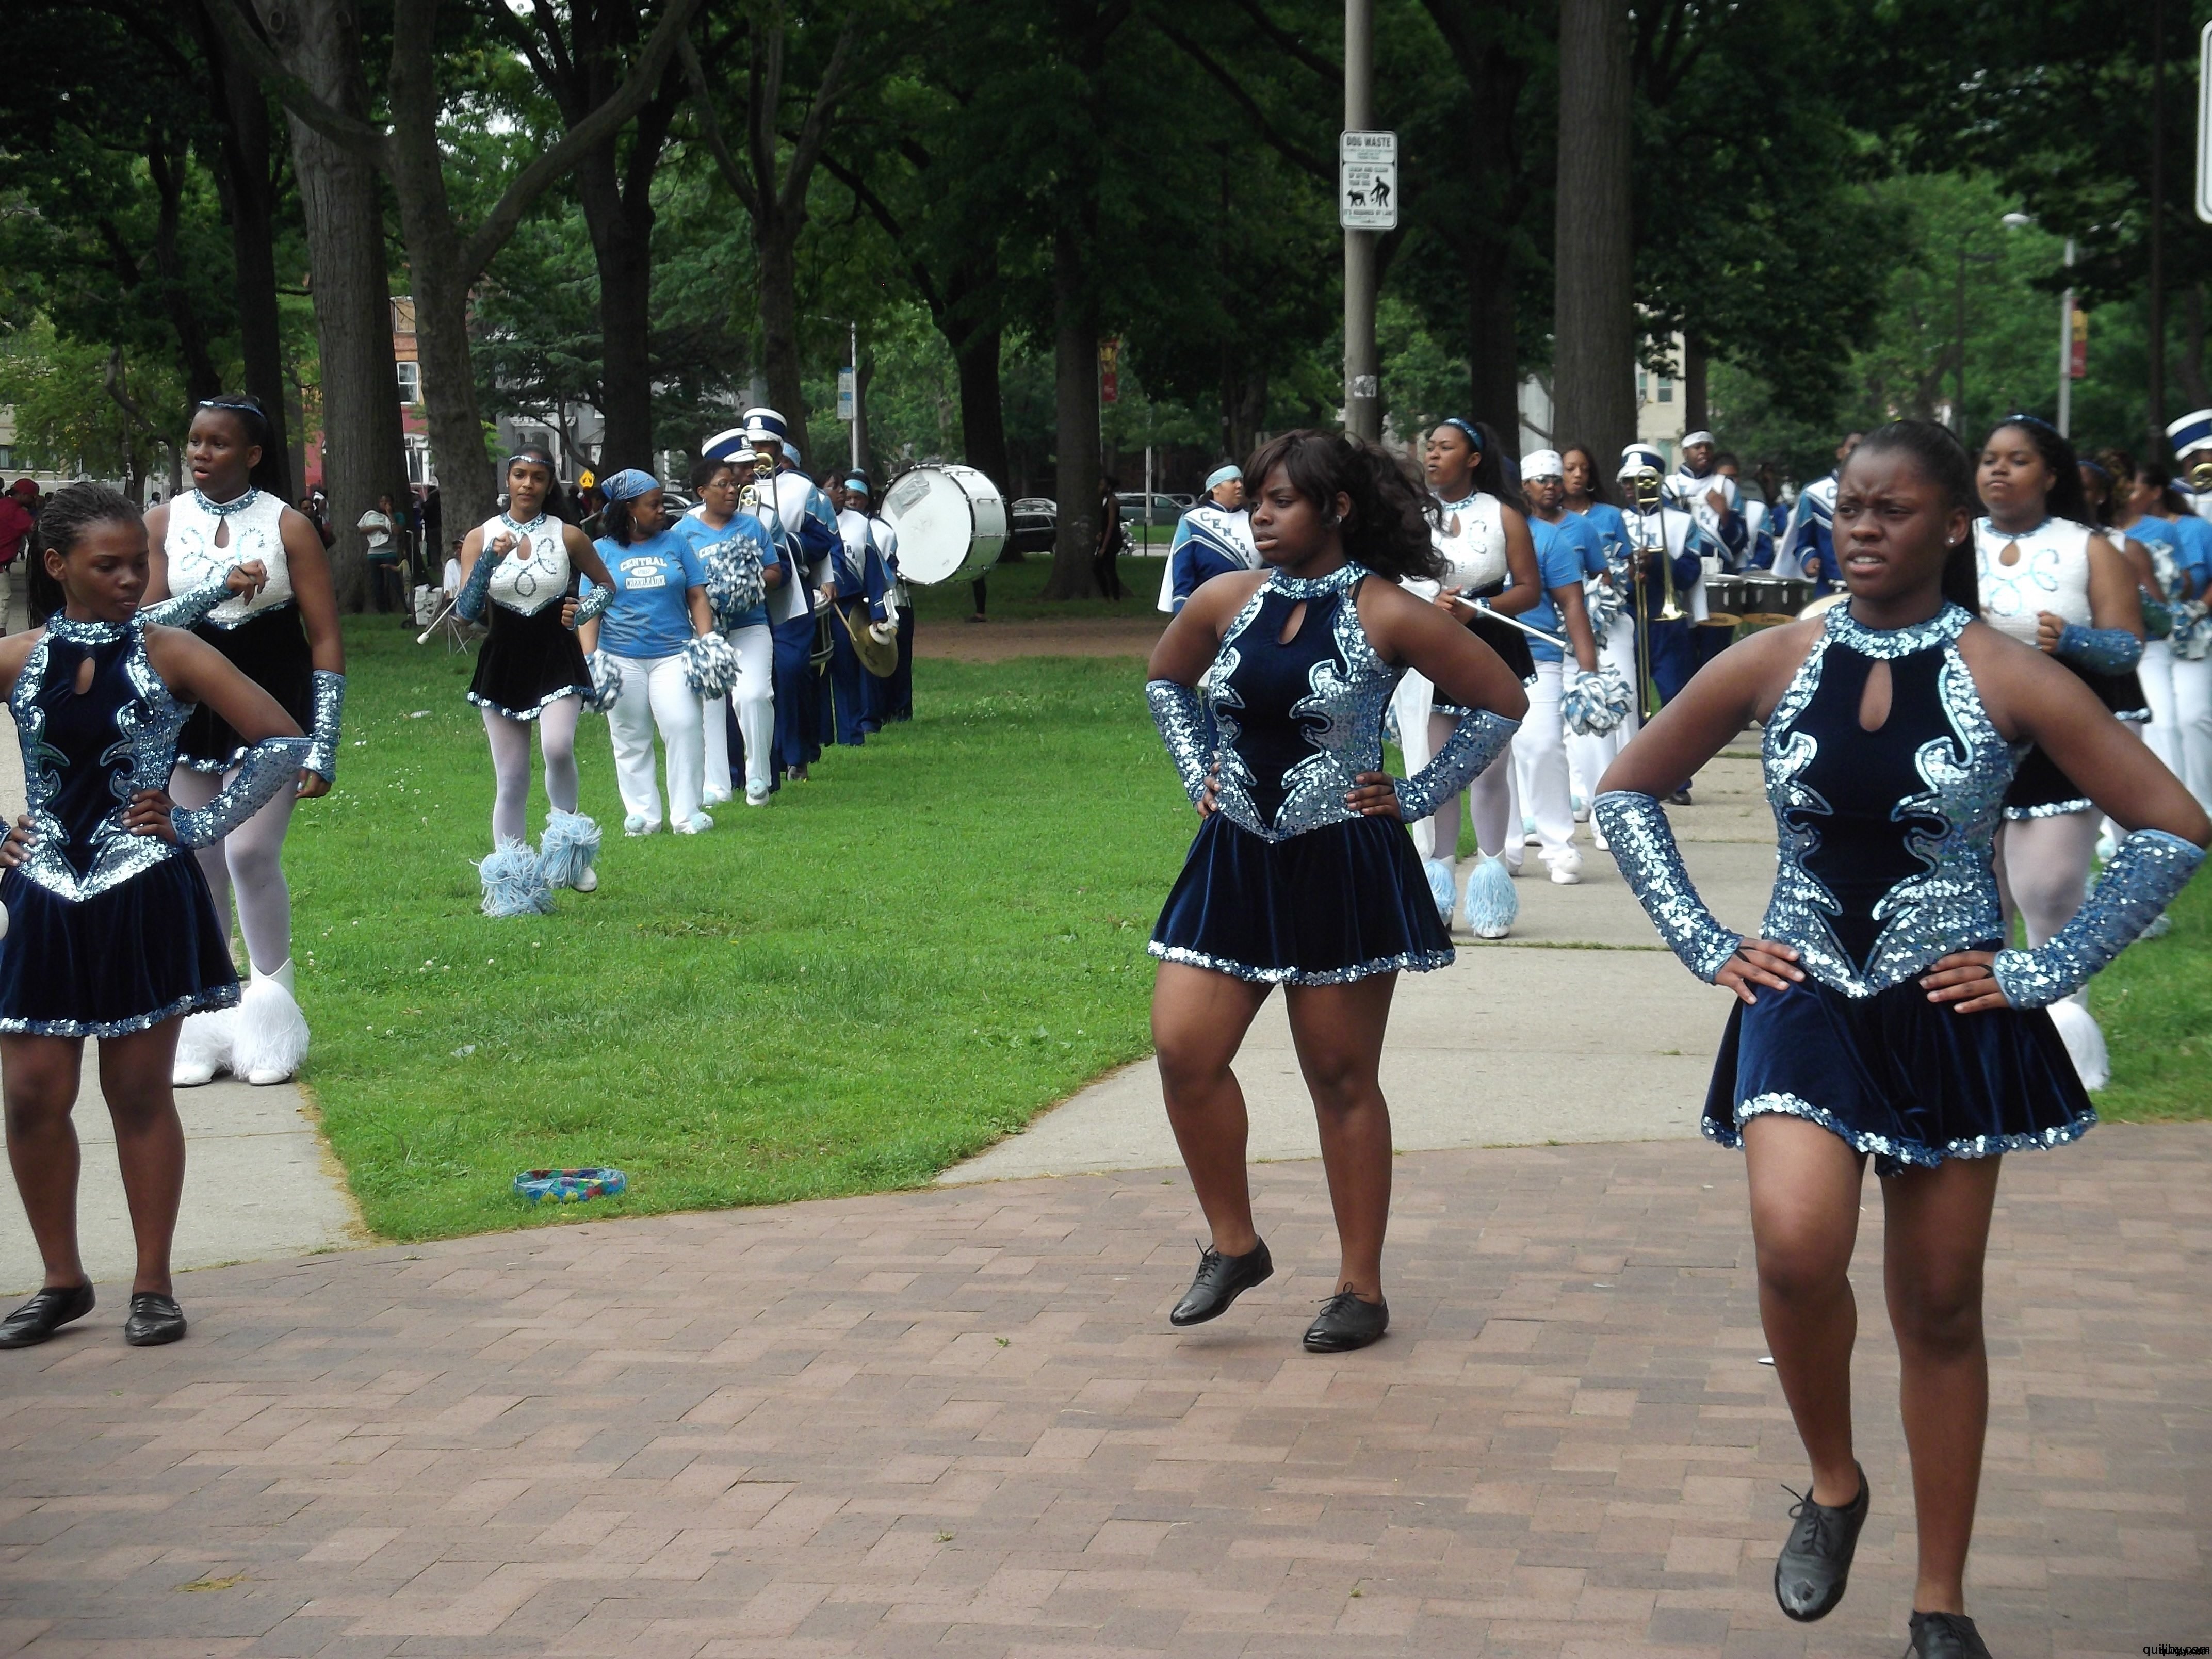 Central High School Marching Band